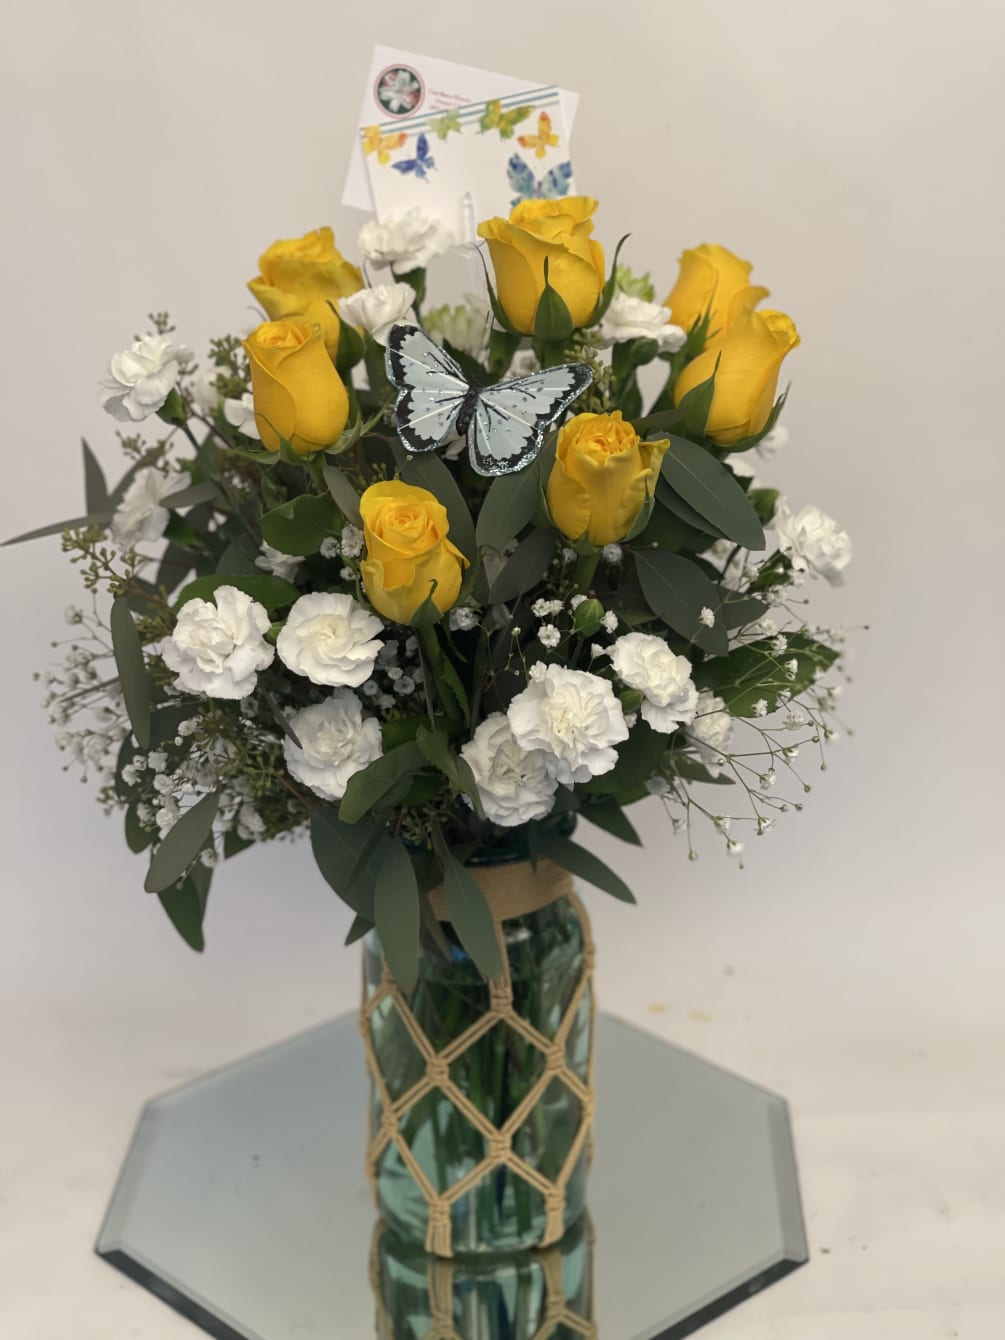 Made with yellow roses and mums